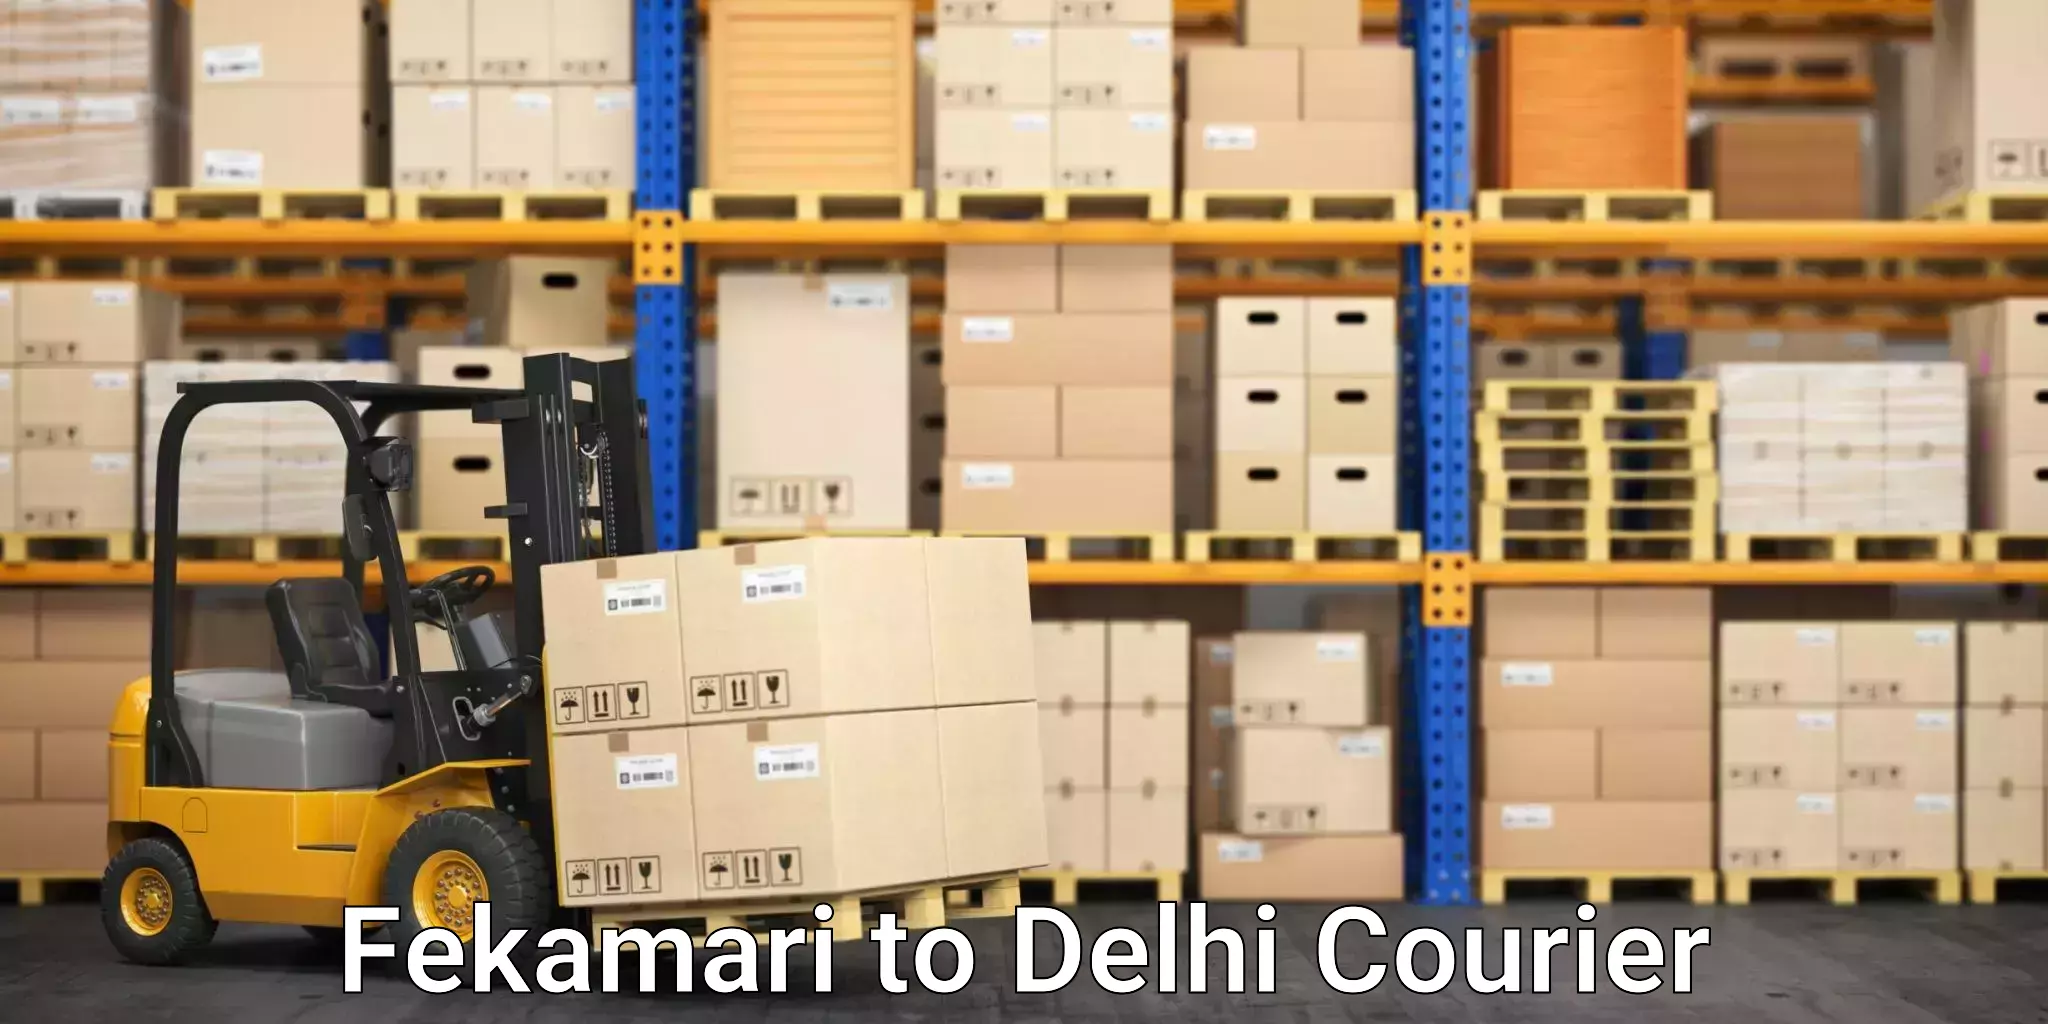 State-of-the-art courier technology Fekamari to Delhi